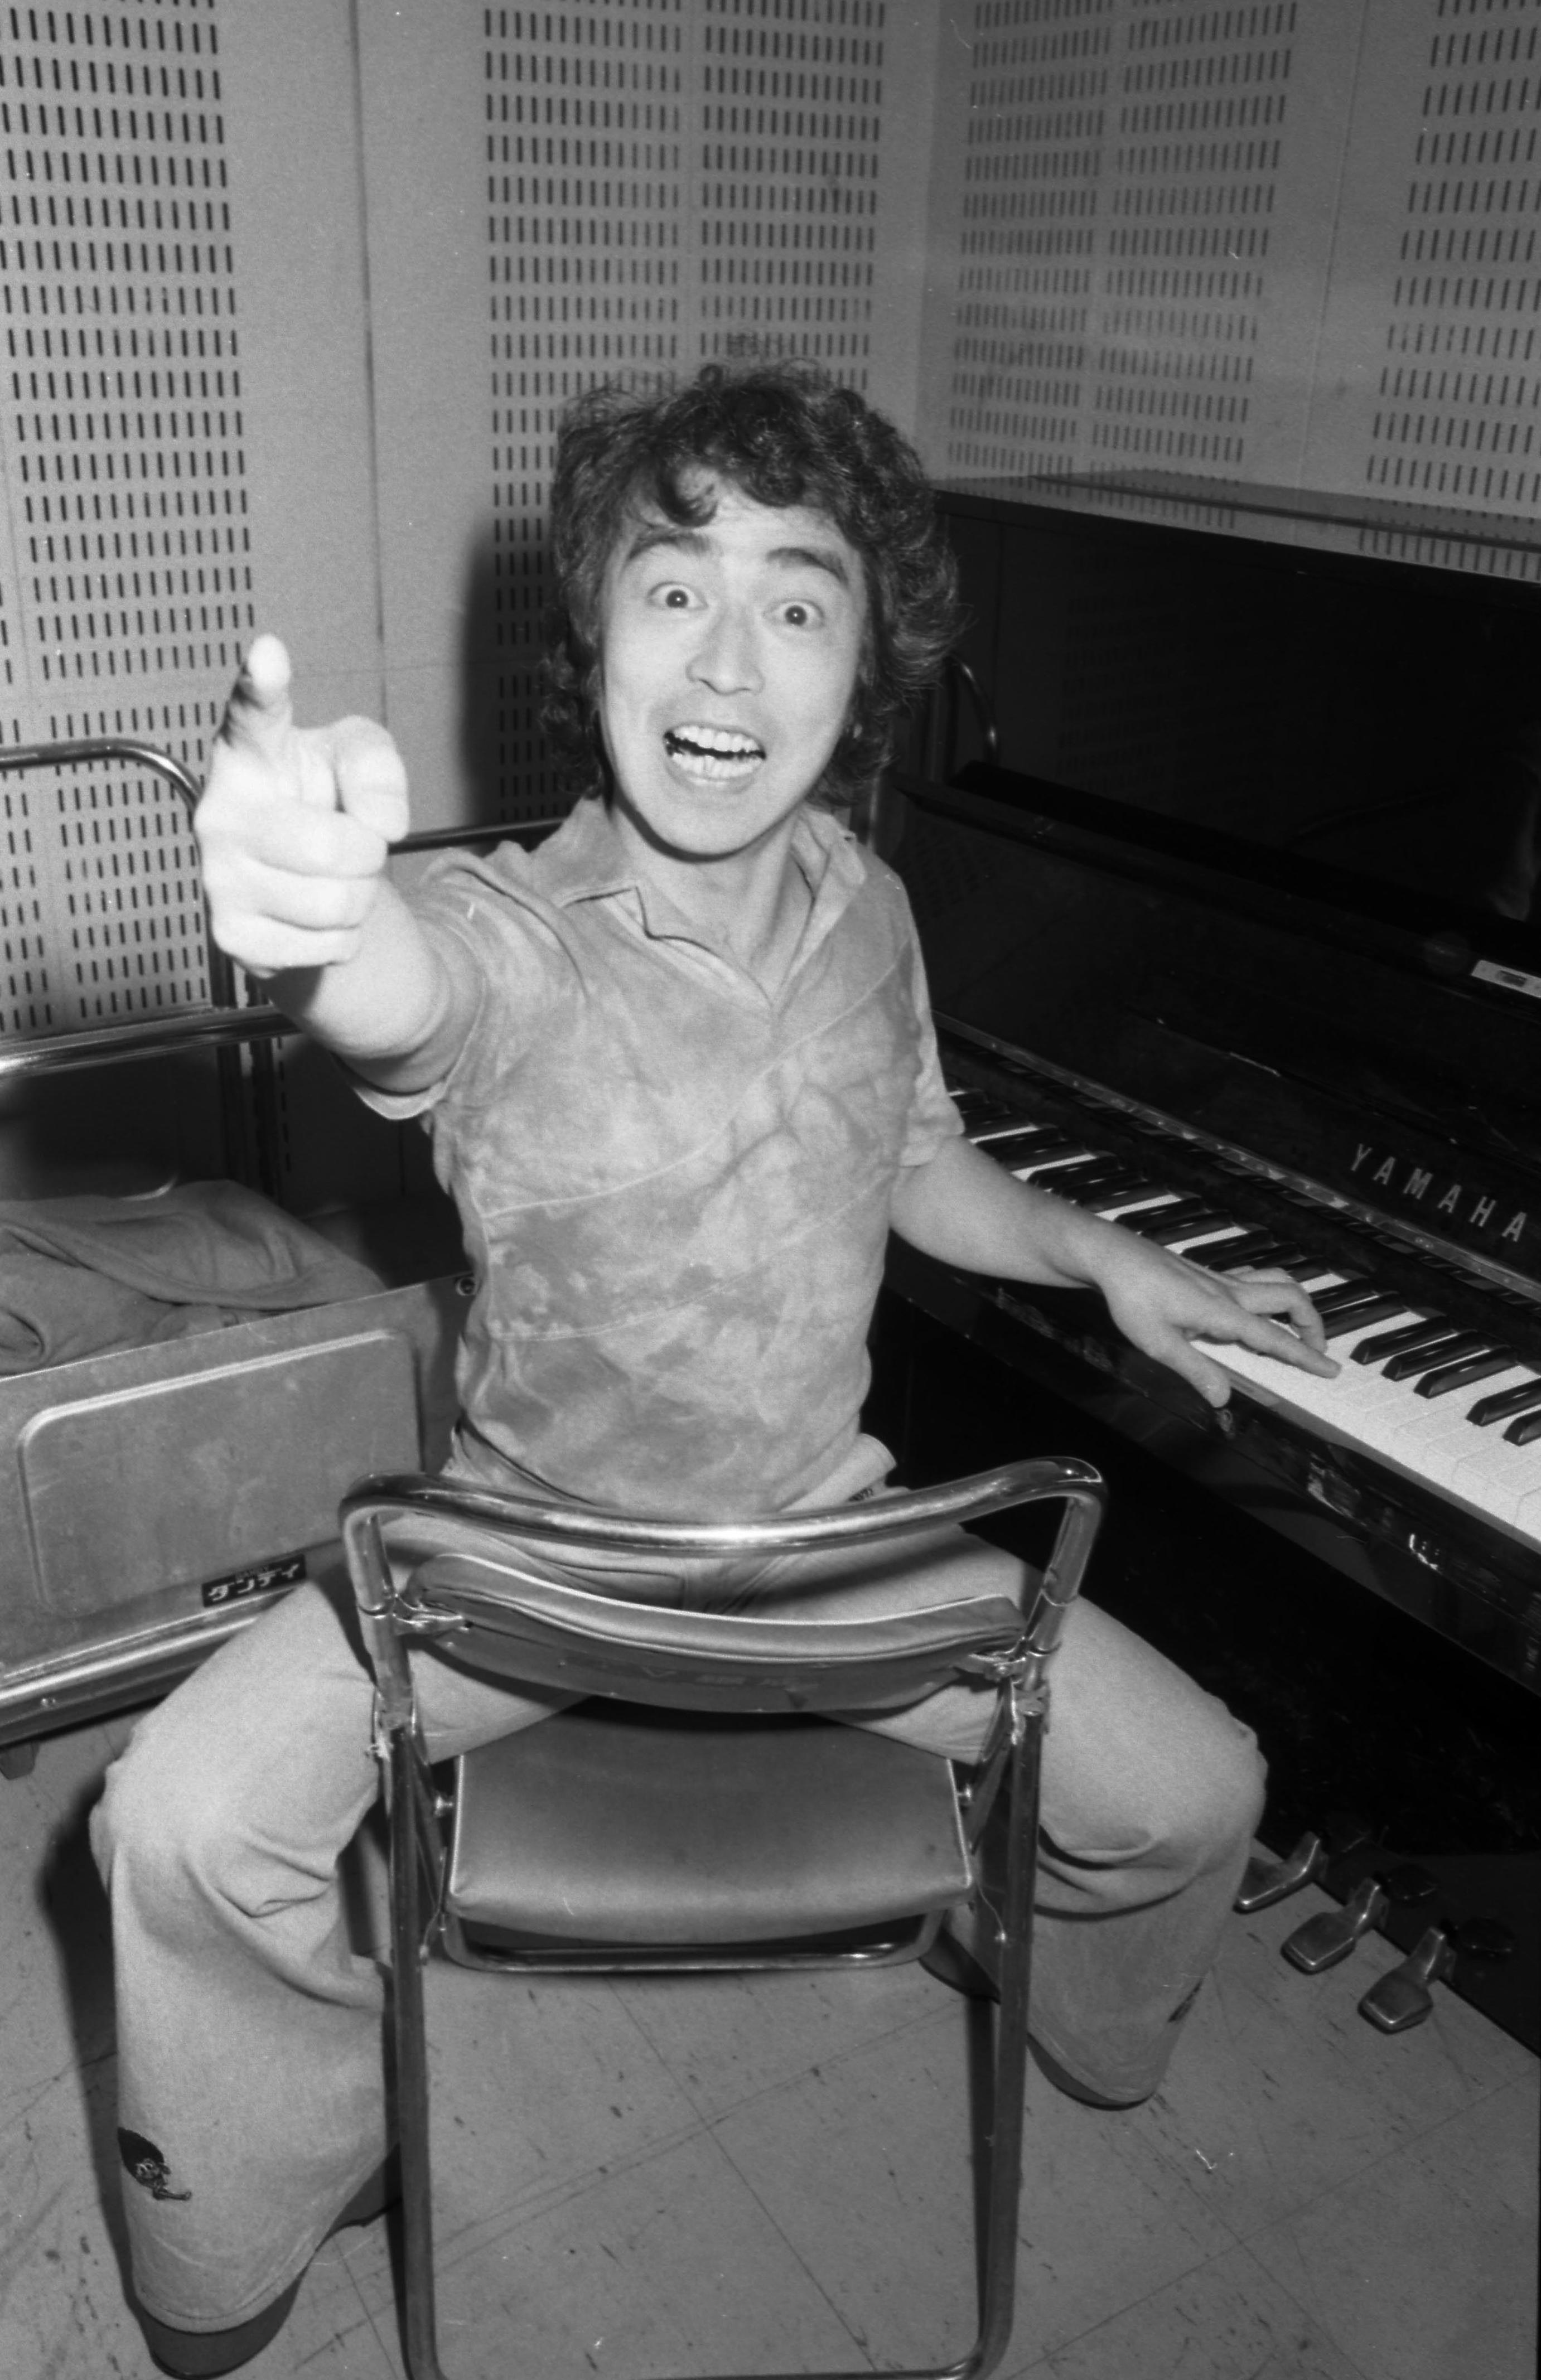 <p>Japanese comedian Ken Shimura, who co-starred on the Japanese variety show "Shimura Ken no Bakatonosama," passed away on March 29 from COVID-19 health complications. He was 70. Known for his slapstick comedy, Ken was often referred to as "Japan's Robin Williams."</p>